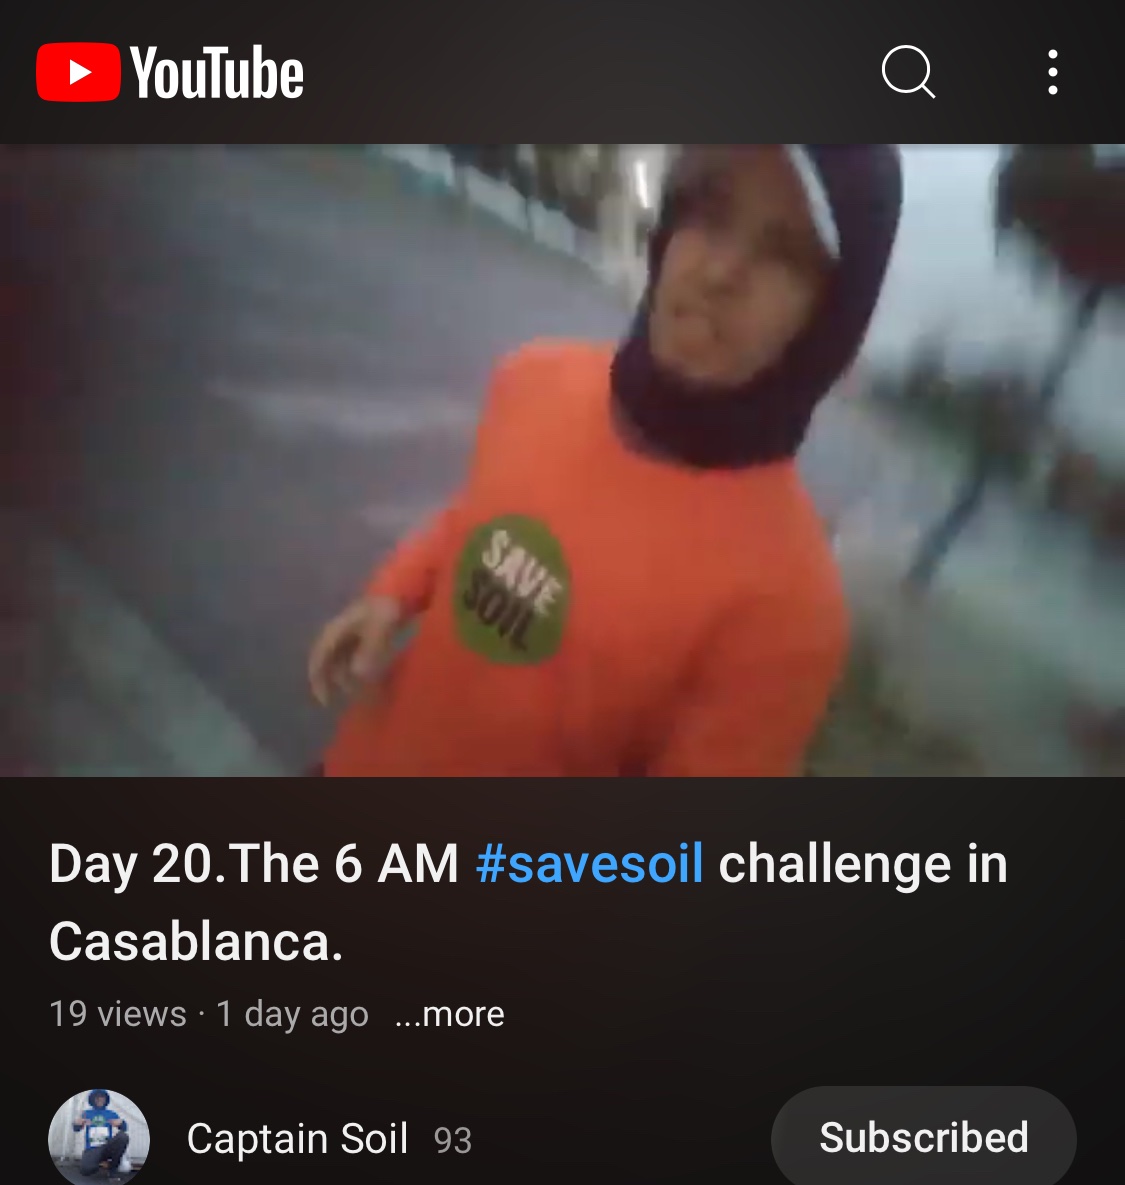 Hats off to this committed #EarthBuddy CaptainSoil @SuperKhal007  daily #RunningForSoil to spread awareness for the need to #SaveSoil 

Day 17-20
m.youtube.com/watch?v=gof8OI… 

m.youtube.com/watch?v=sqfVsN… 

m.youtube.com/watch?v=SO22QH…  

m.youtube.com/watch?v=KfmEFY… 

savesoil.org